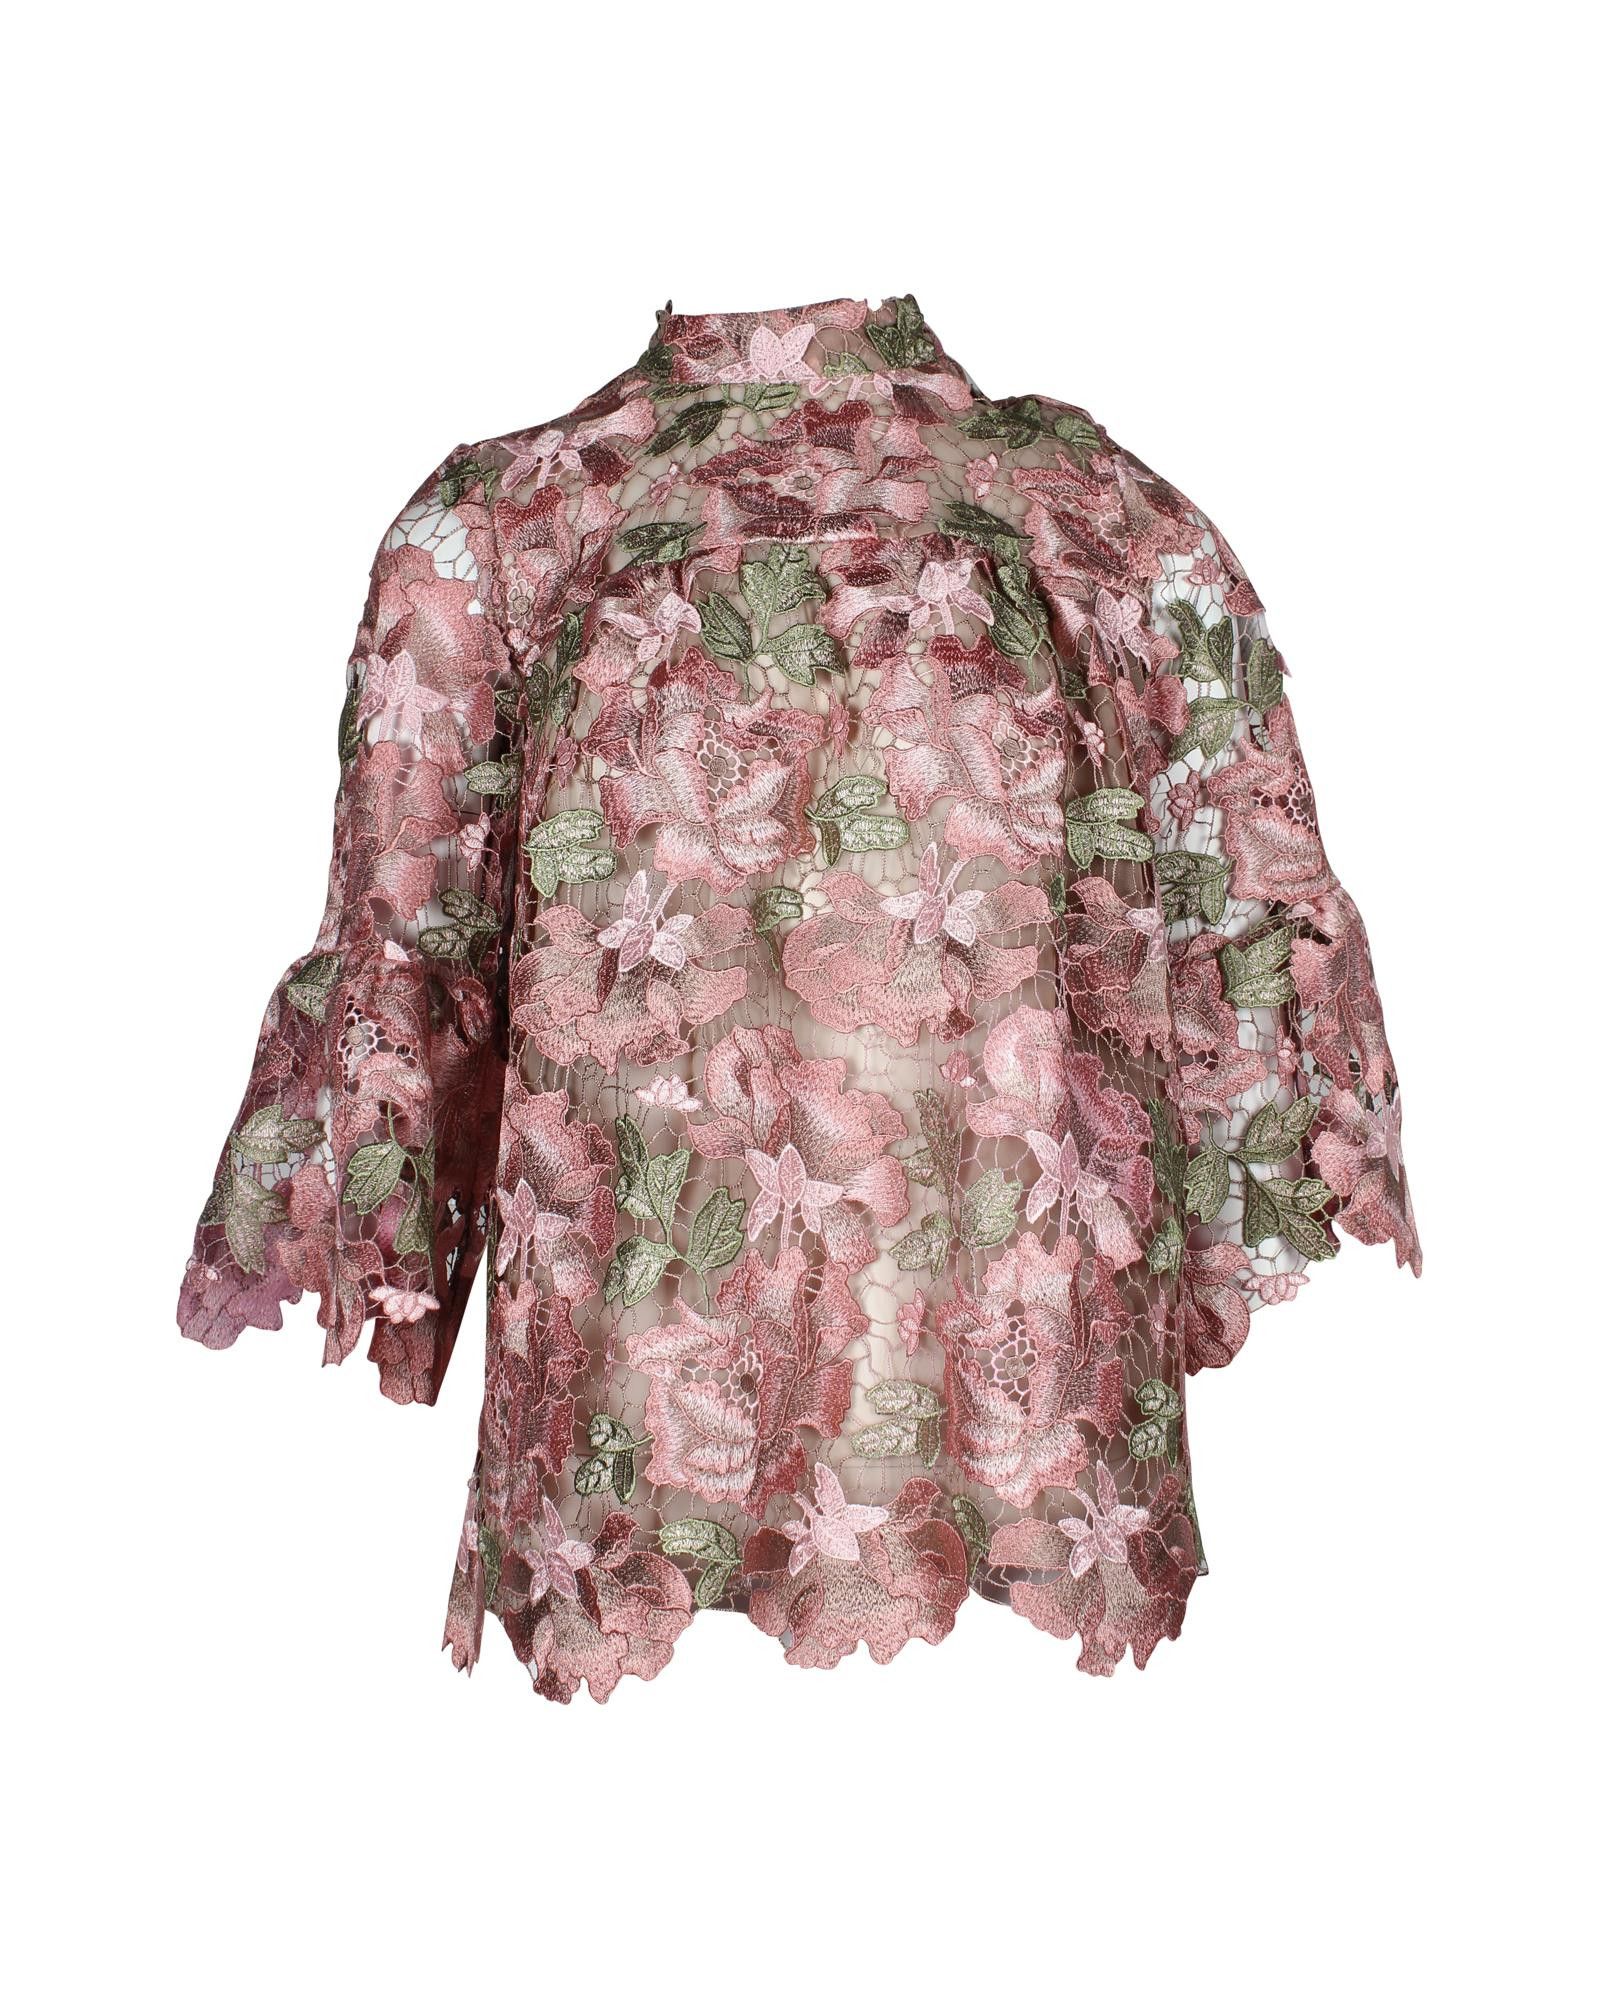 Anna Sui Floral Lace Mock Neck Blouse in Pink Polyester Size XS / US 0-2 / IT 36-38 - 1 Preview